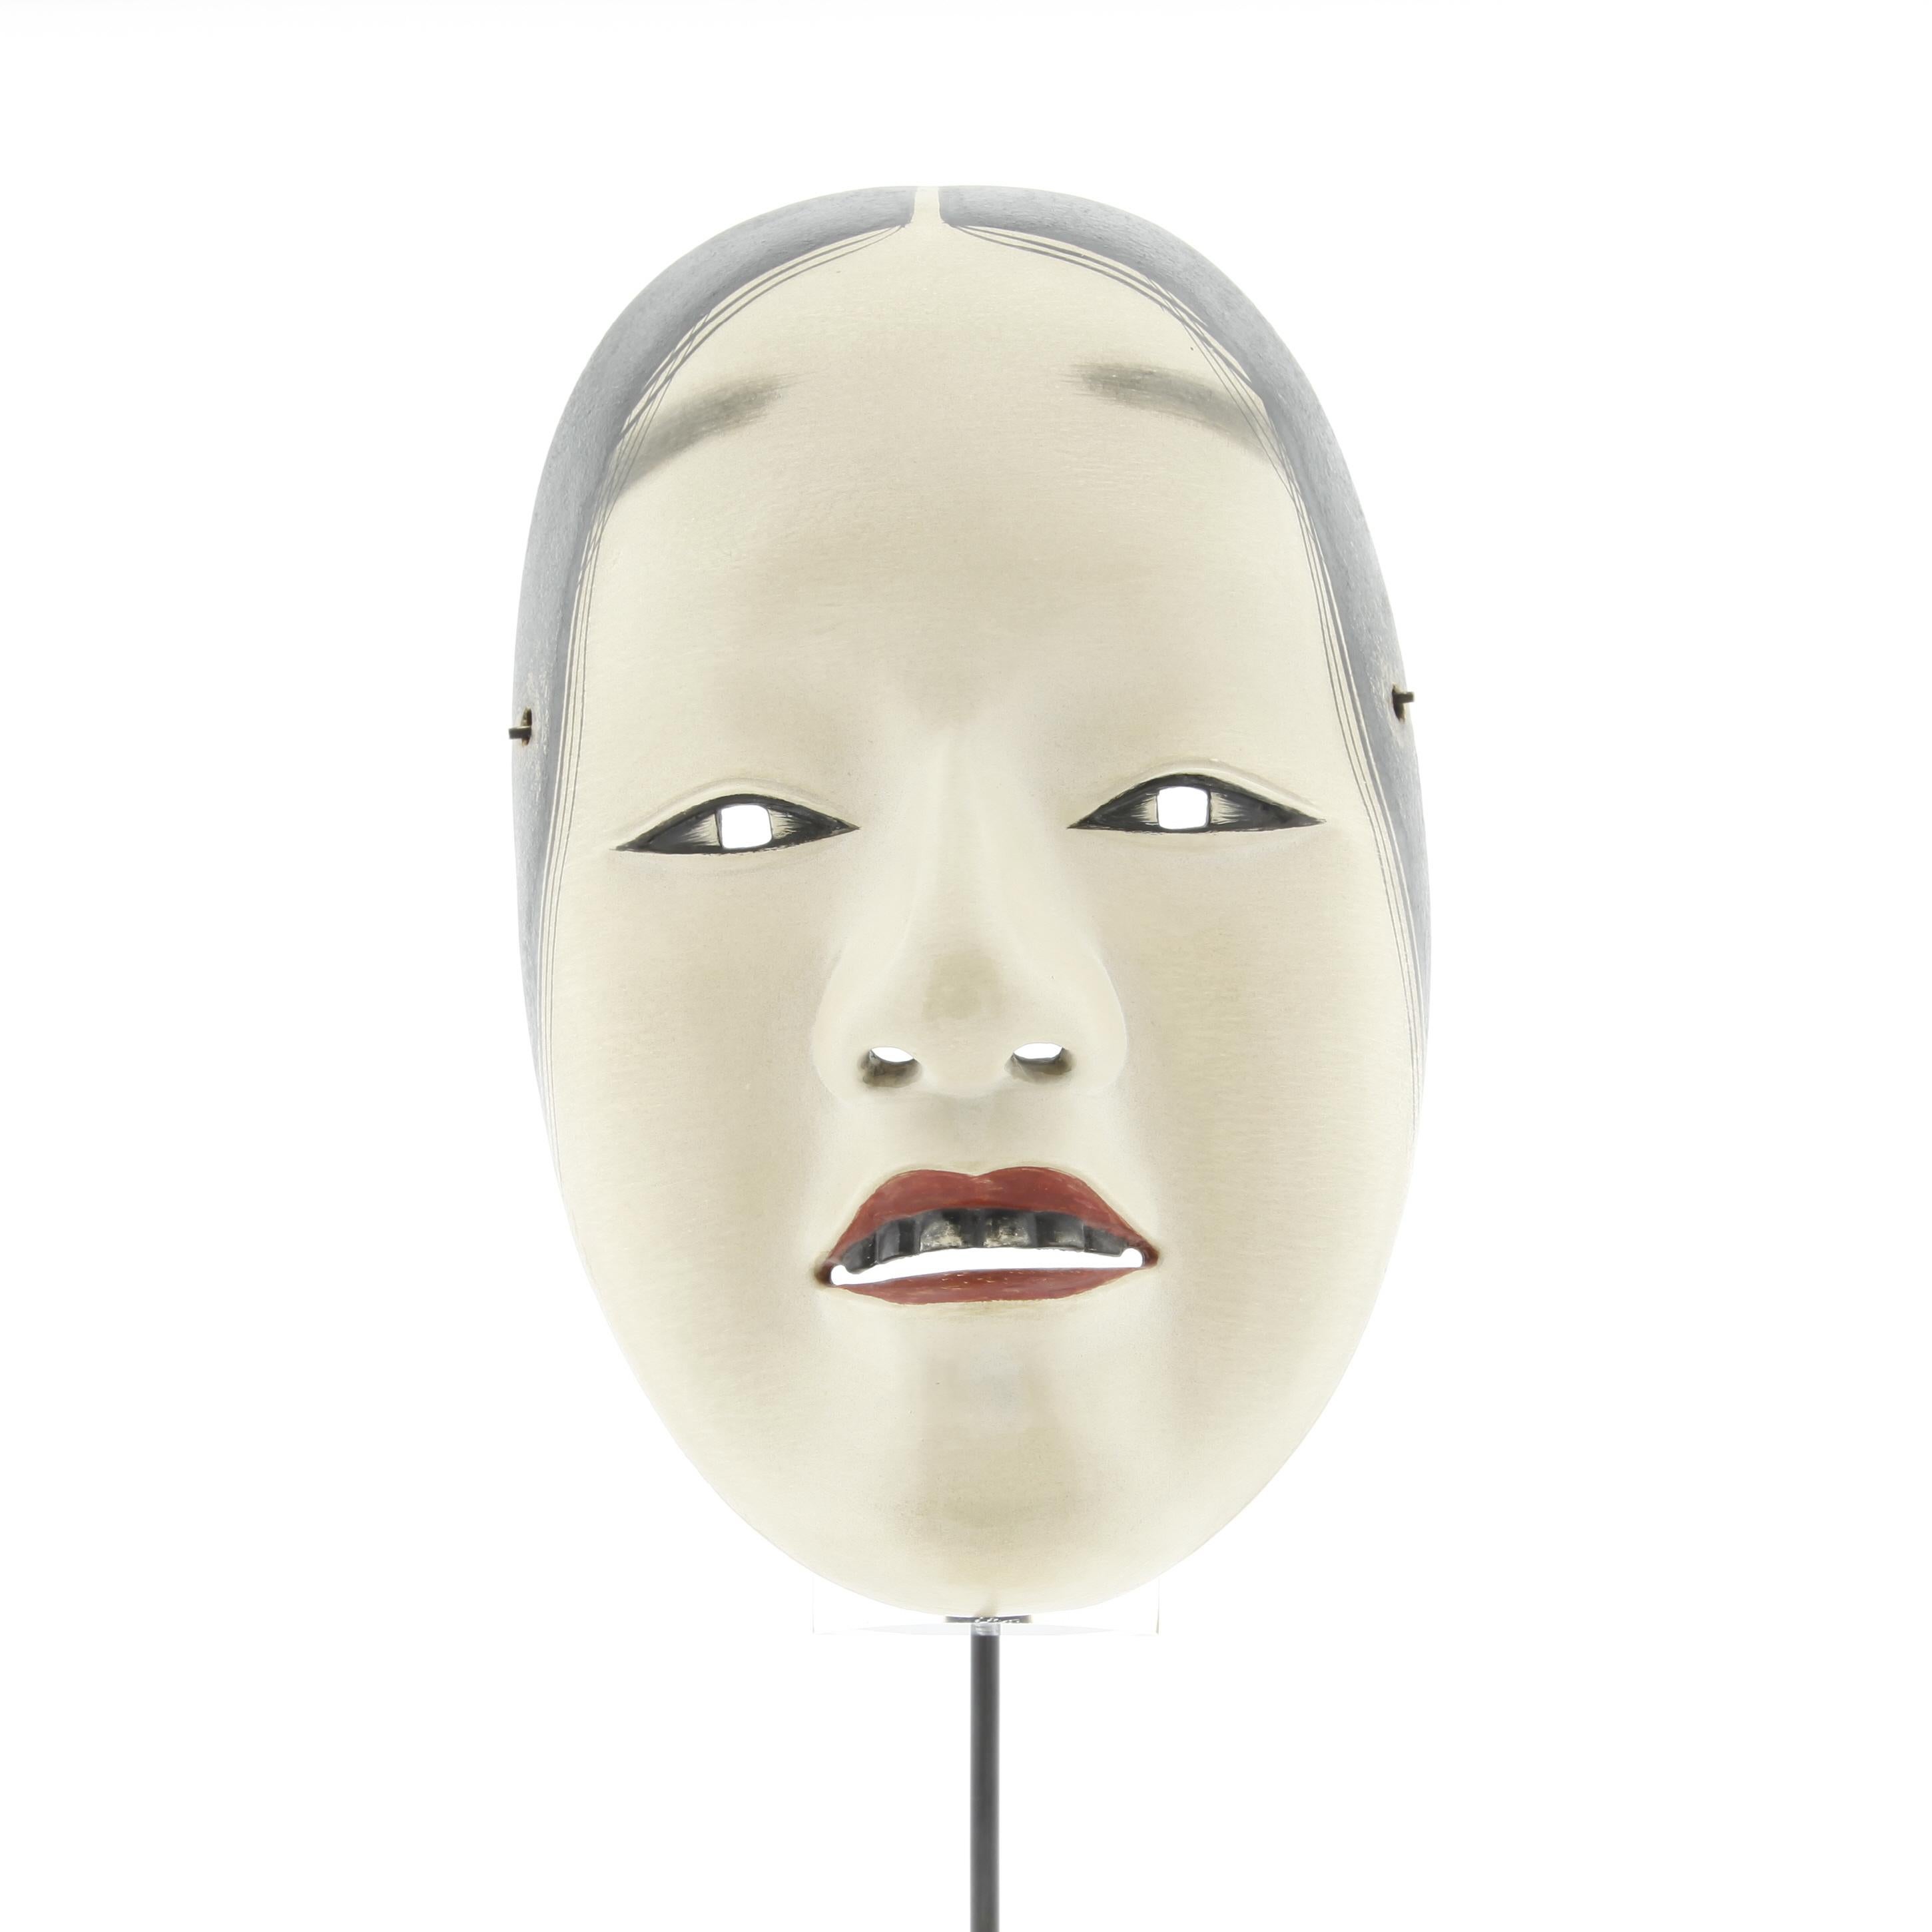 Noh Mask of a Young Girl, Japanese Classical Theatre, 20th Century, Woodcraft - Mixed Media Art by Unknown